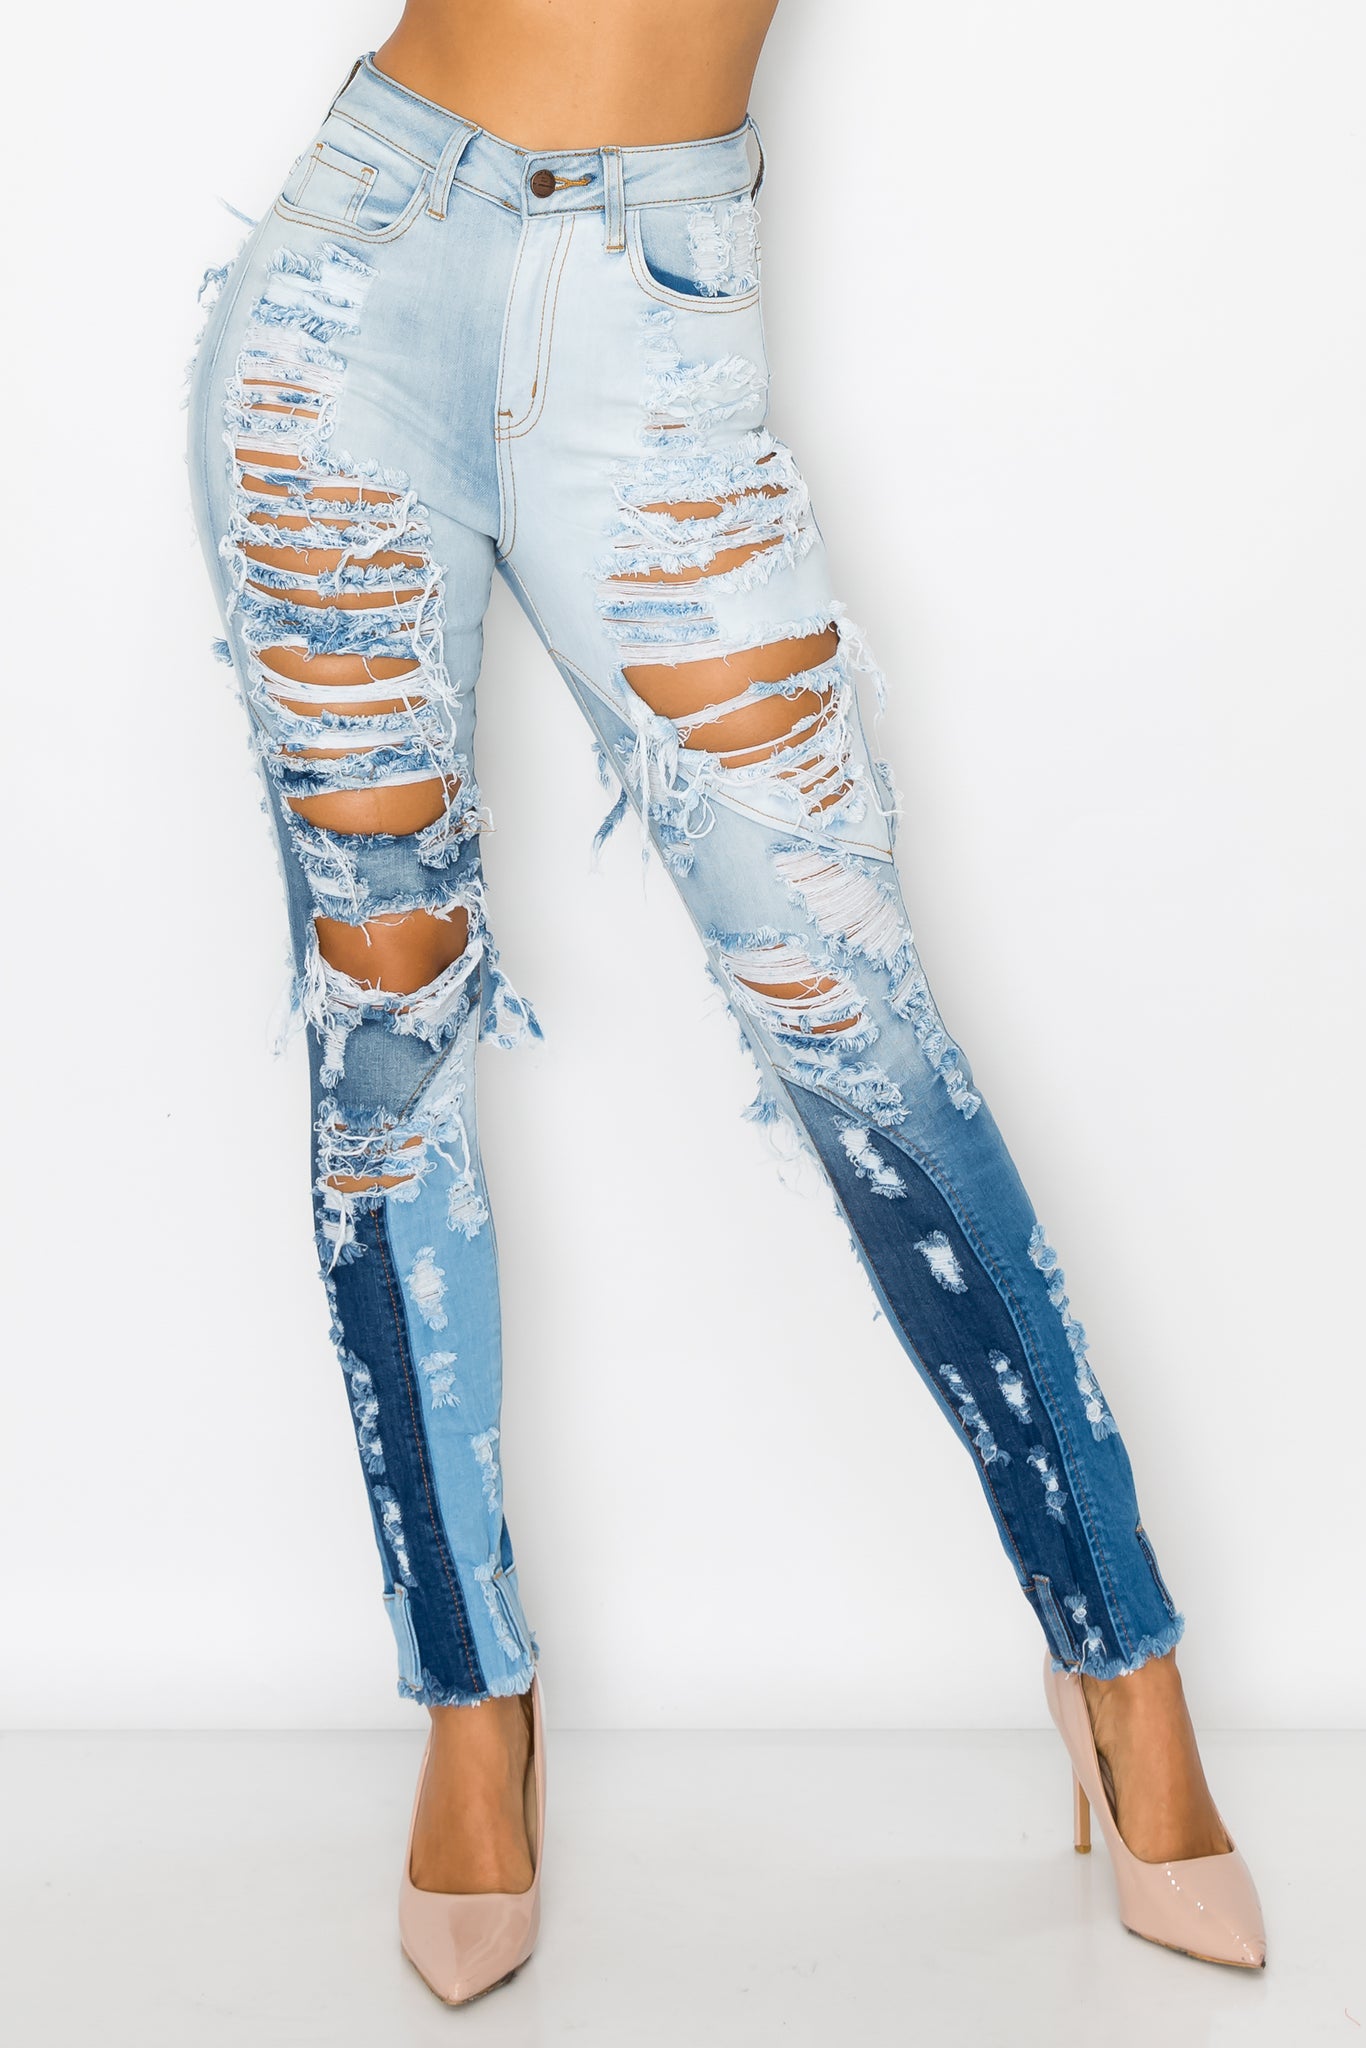 4915 Women's High Waisted Shredded Washed Down Skinny Jeans